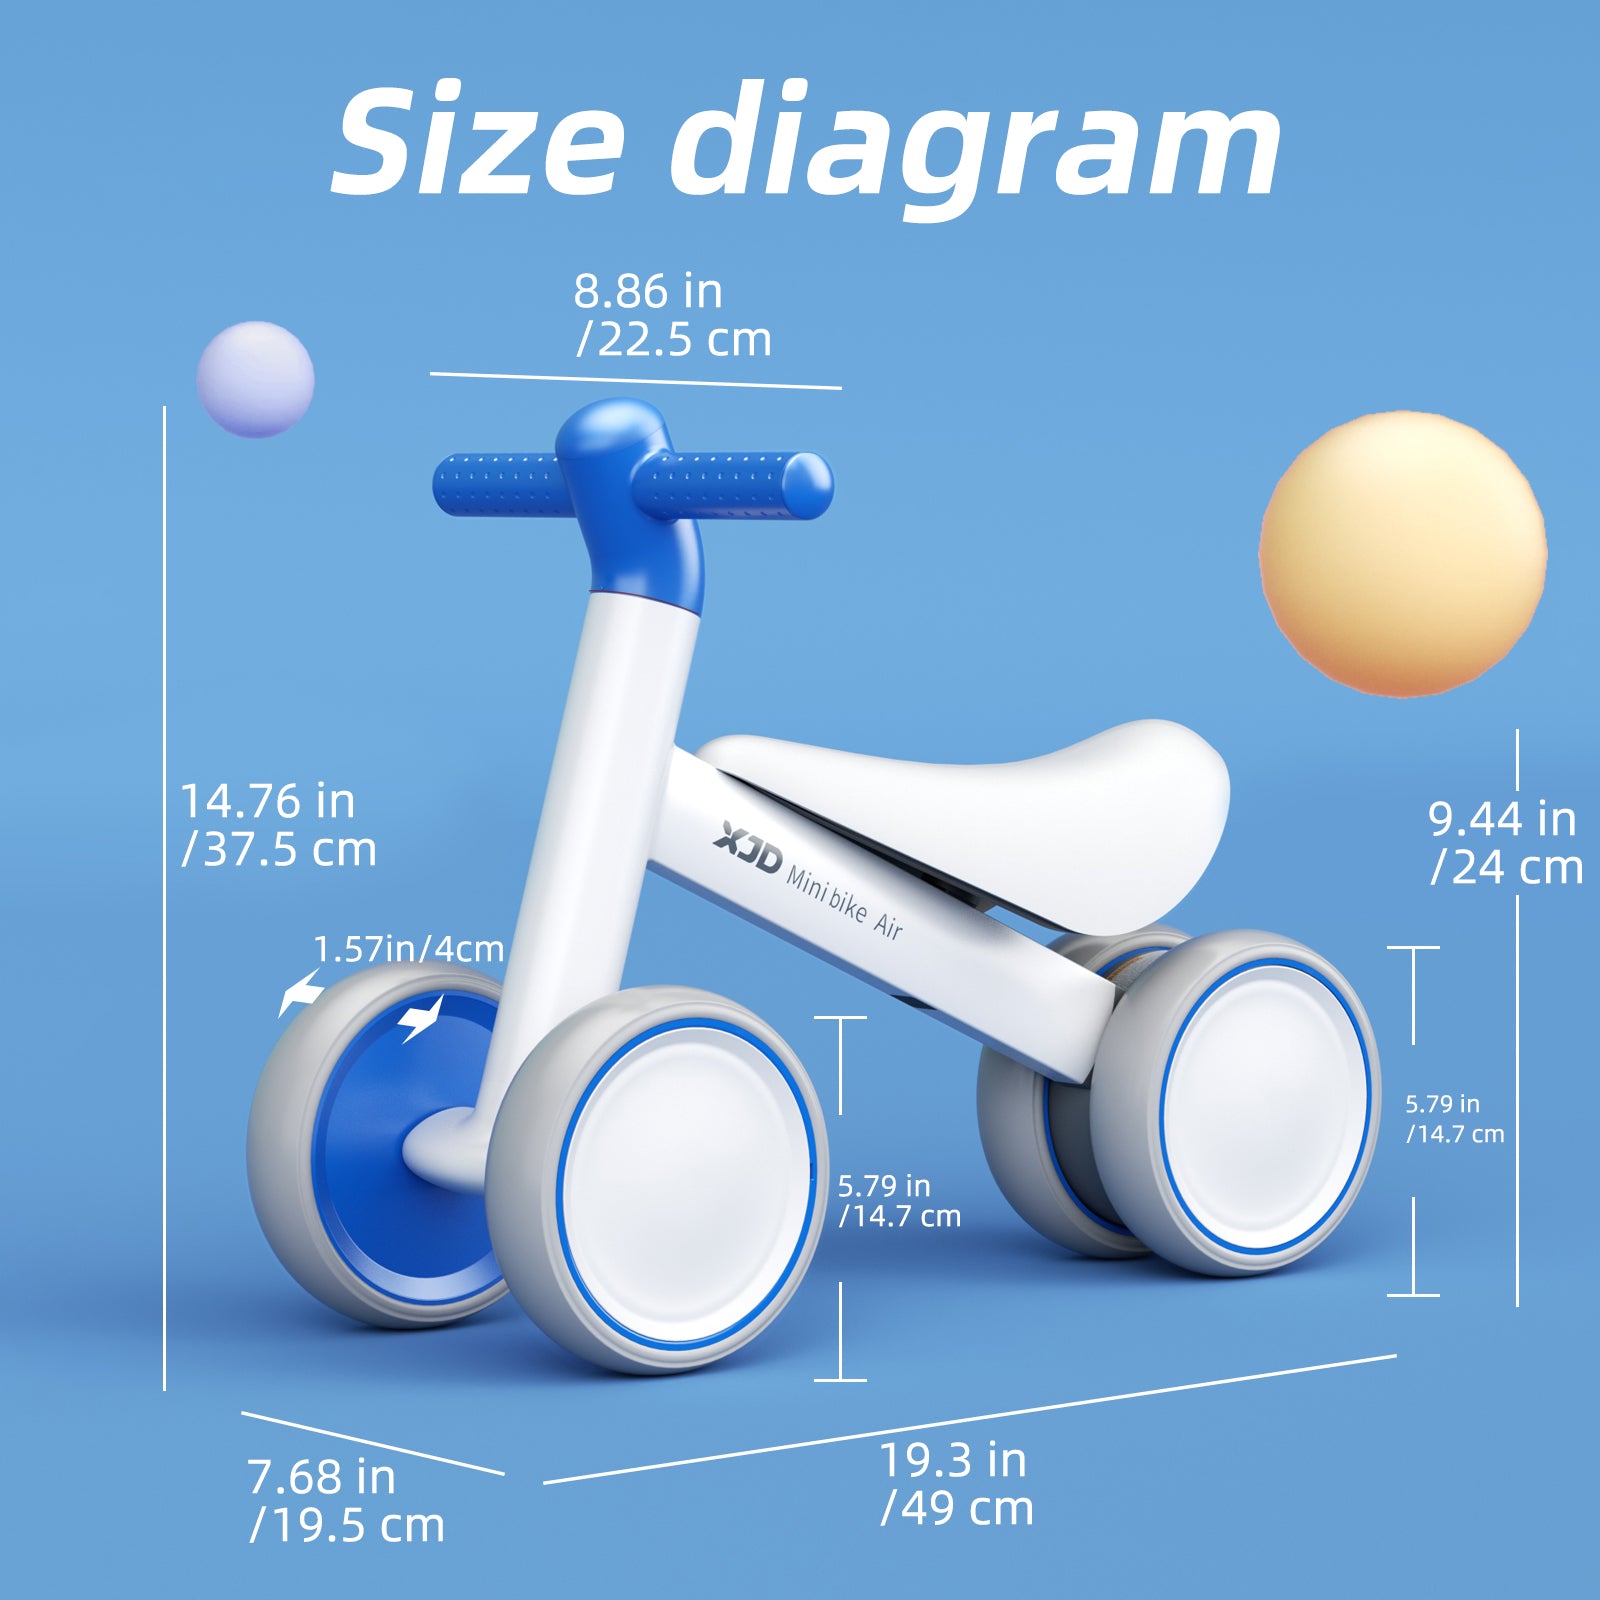 XJD Baby Balance Bike, 4 Wheels for Toddlers as A Birthday Gift - Blue White